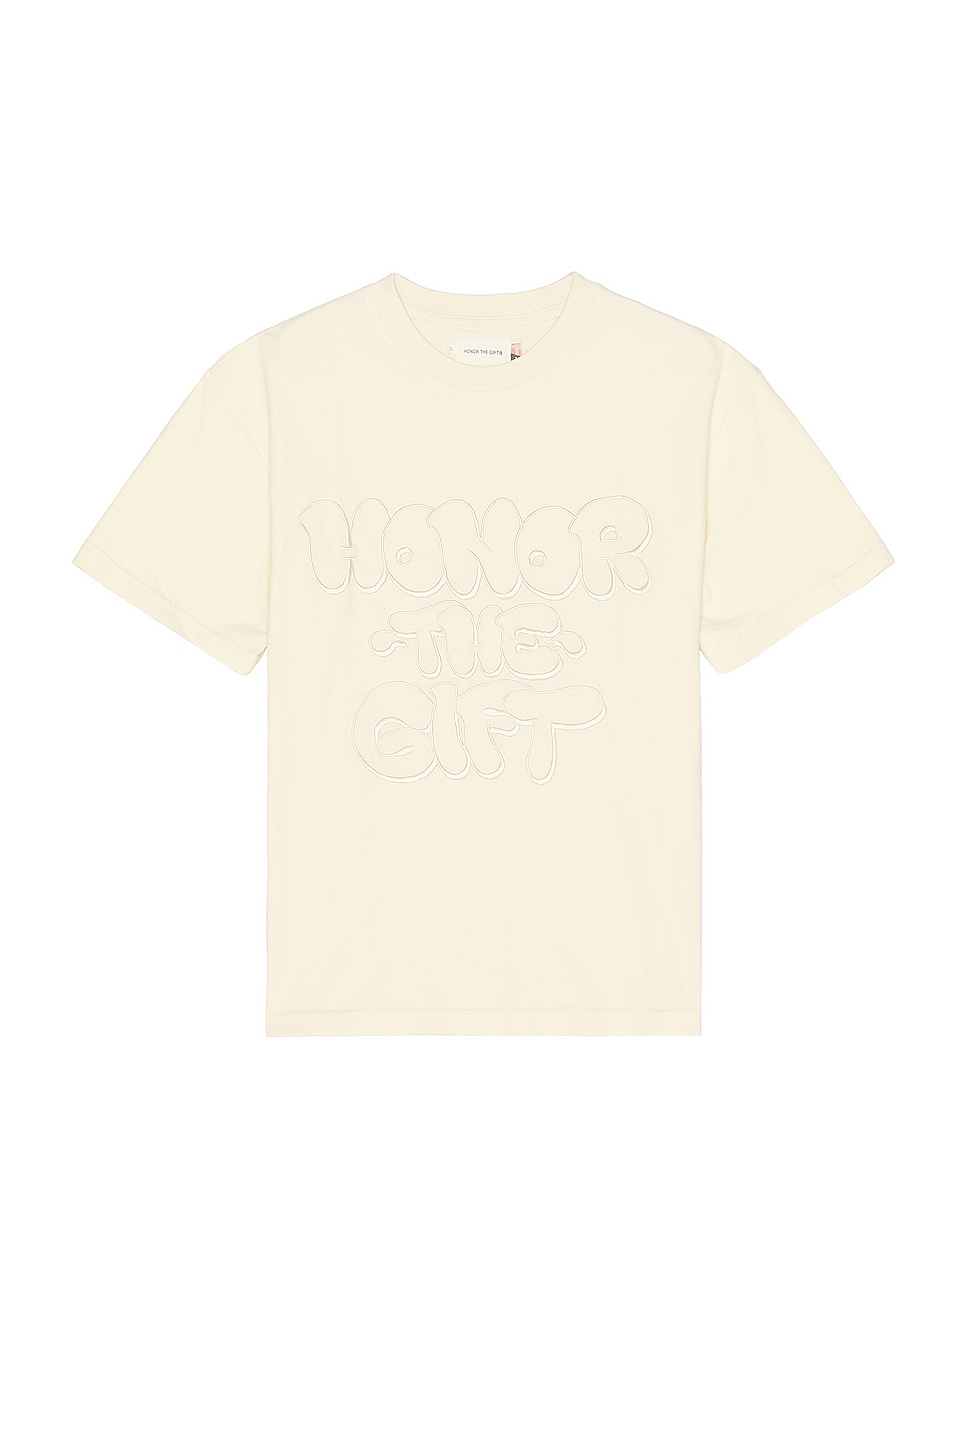 Image 1 of Honor The Gift Amp'd Up Tee in Bone